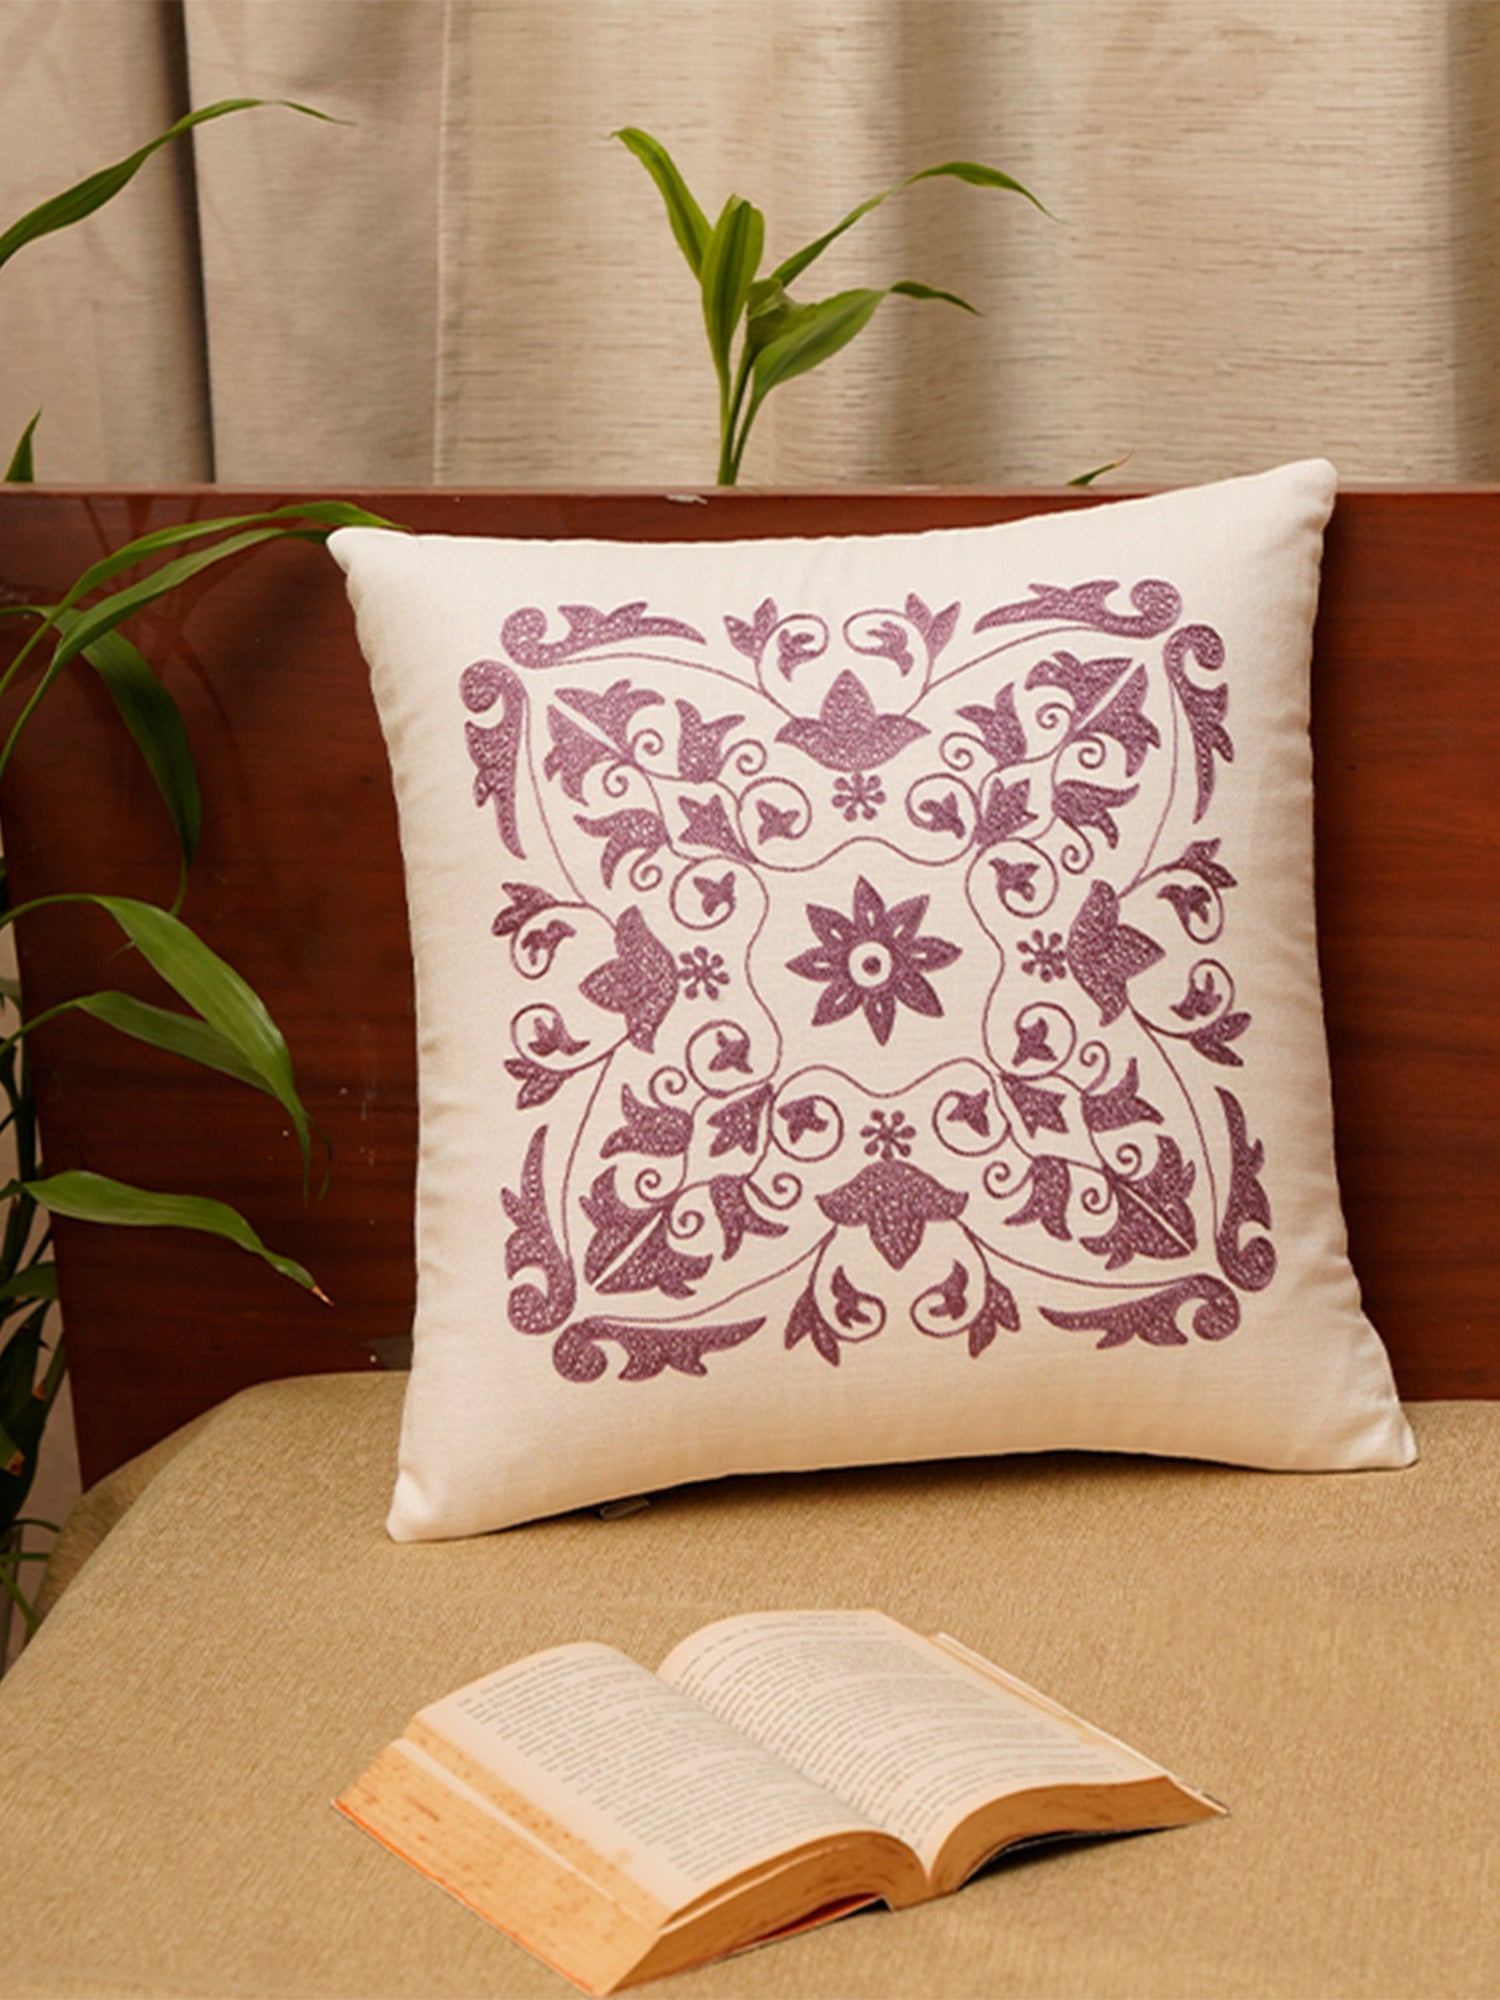 Embroidered Cushion Cover Cotton Off White - 16"x16"